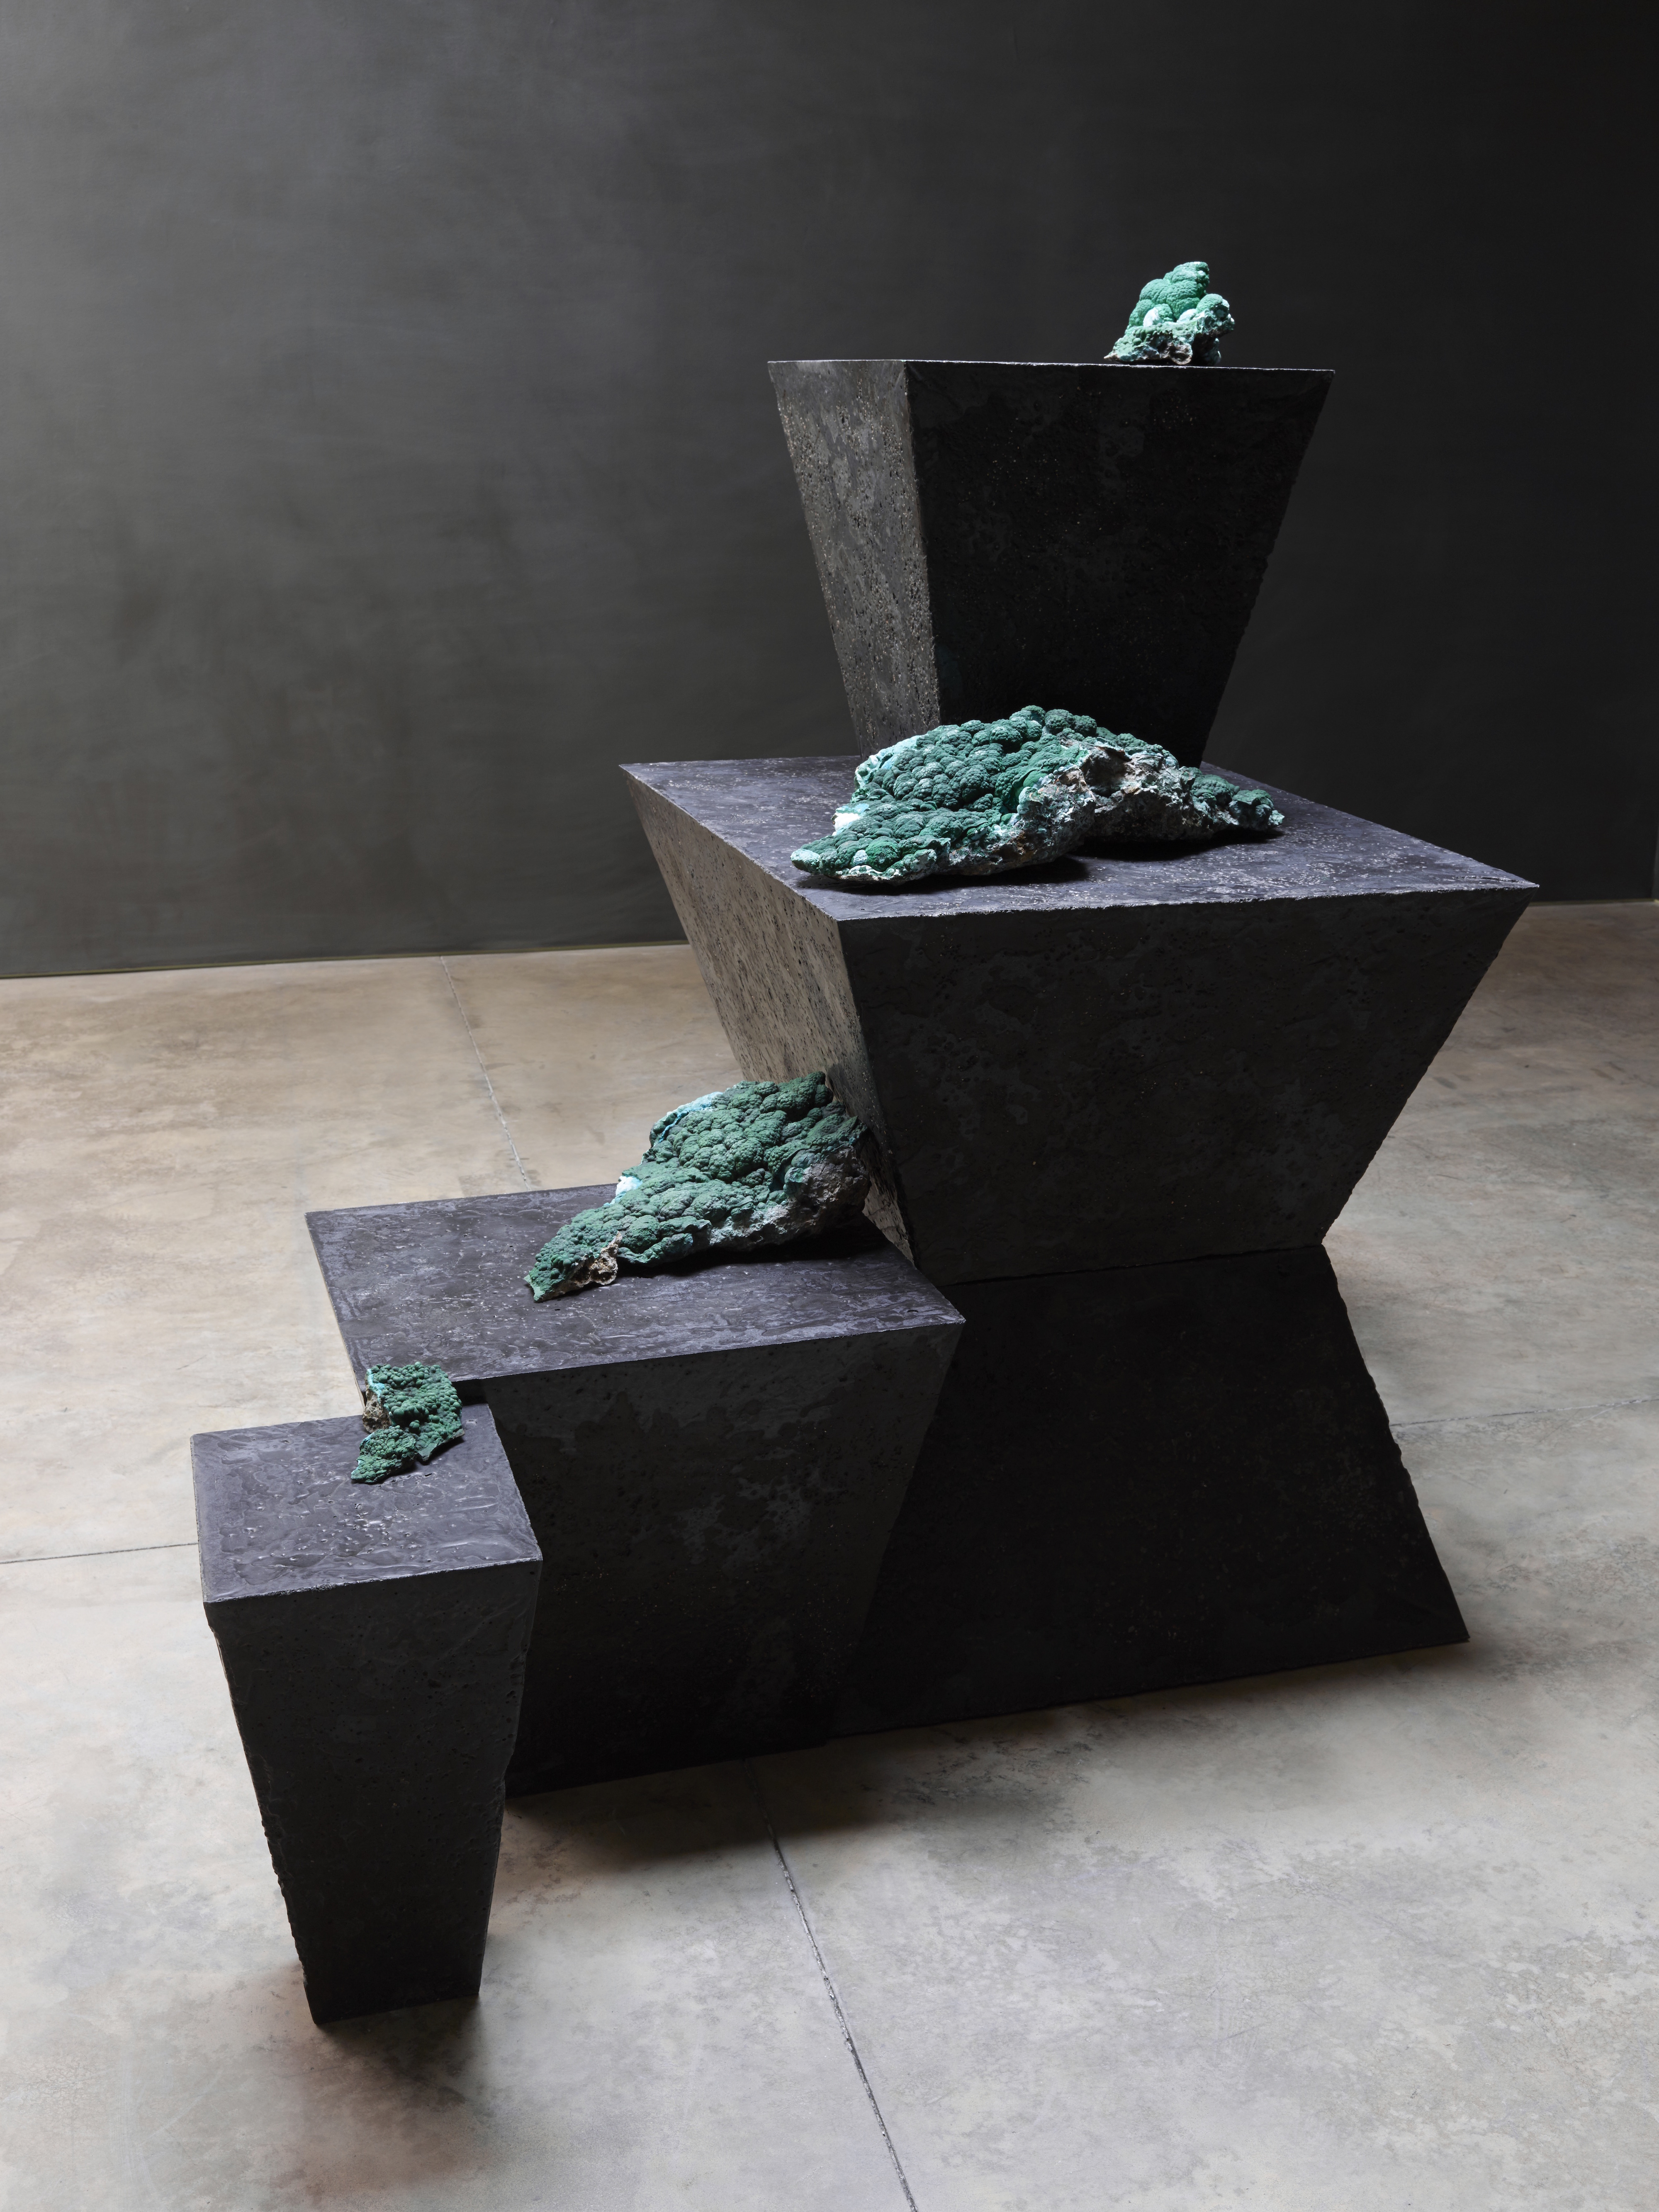 Viñales (Reclining Nude), 2015. Wakkusu ® Concrete, bronze, and malachite, 48 x 64 x 101 inches. Courtesy the artist, and Lehmann Maupin, New York and Hong Kong.